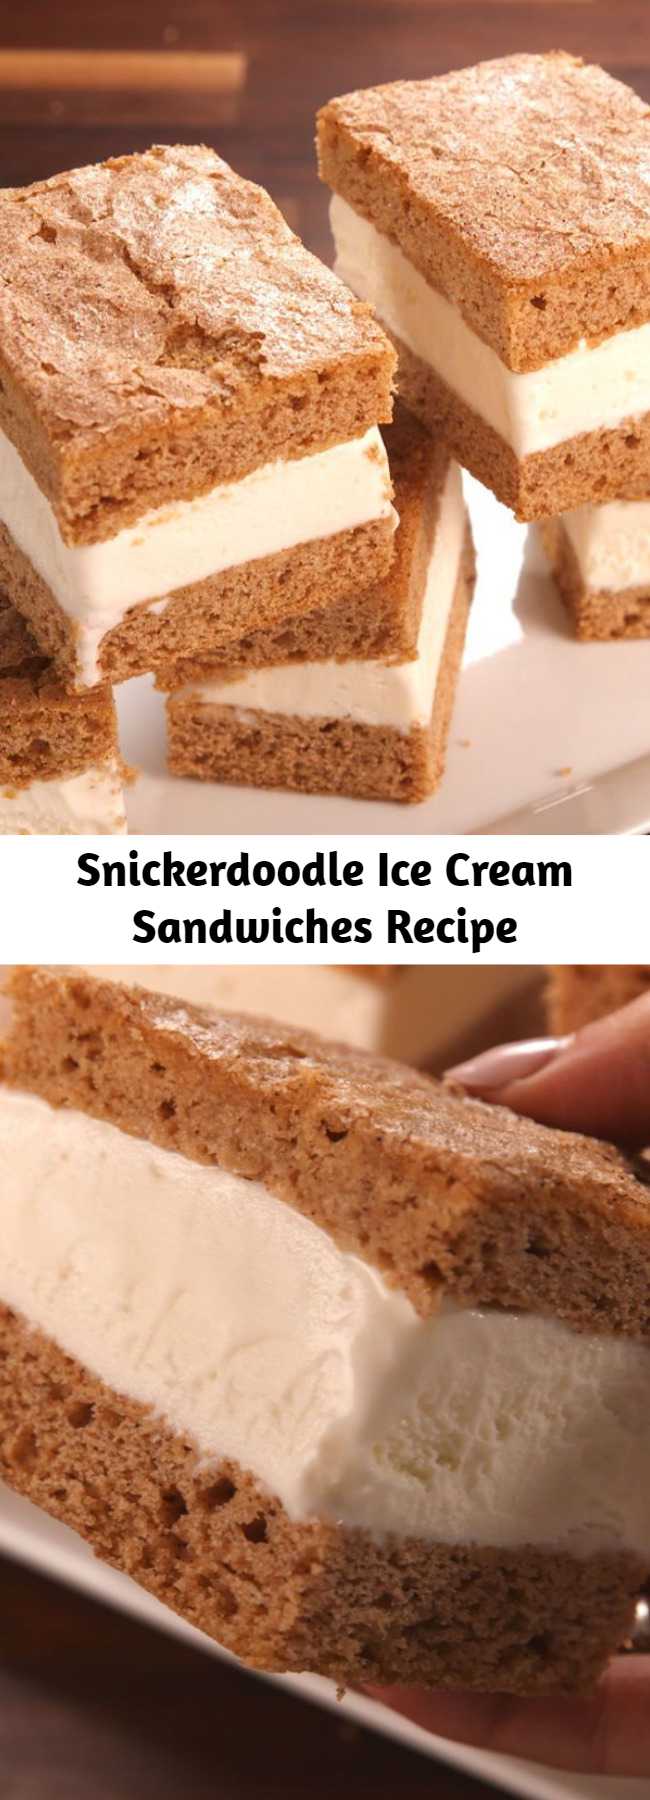 Snickerdoodle Ice Cream Sandwiches Recipe - Who needs a chocolate ice cream sandwich when you can have these snickerdoodle. Why have we not done this before?